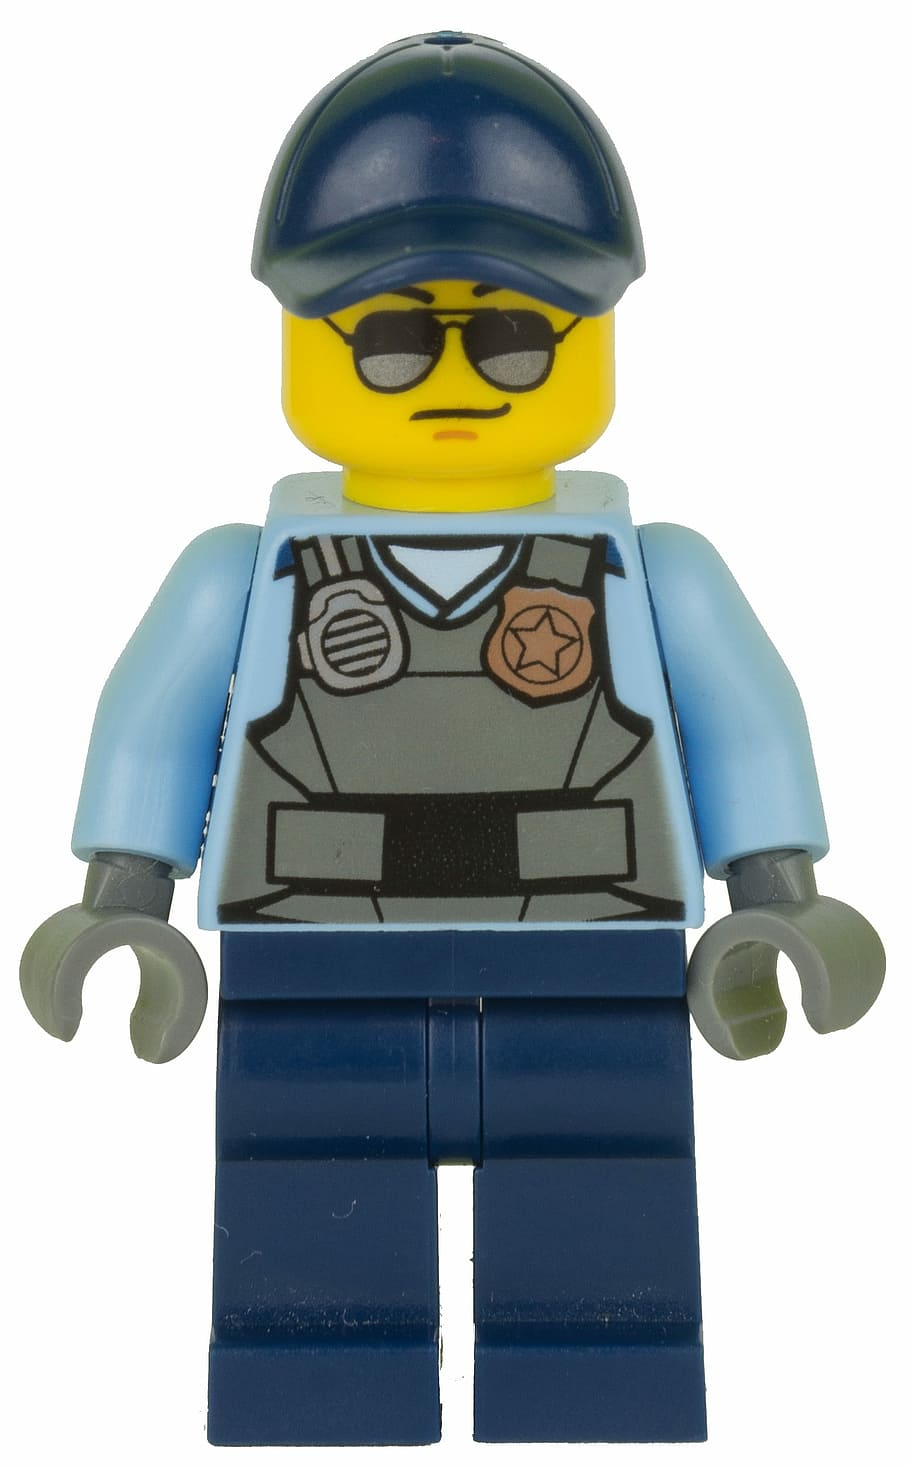 Lego, Figurine, Police, Policeman, white background, cut out, helmet, one person, males, blue